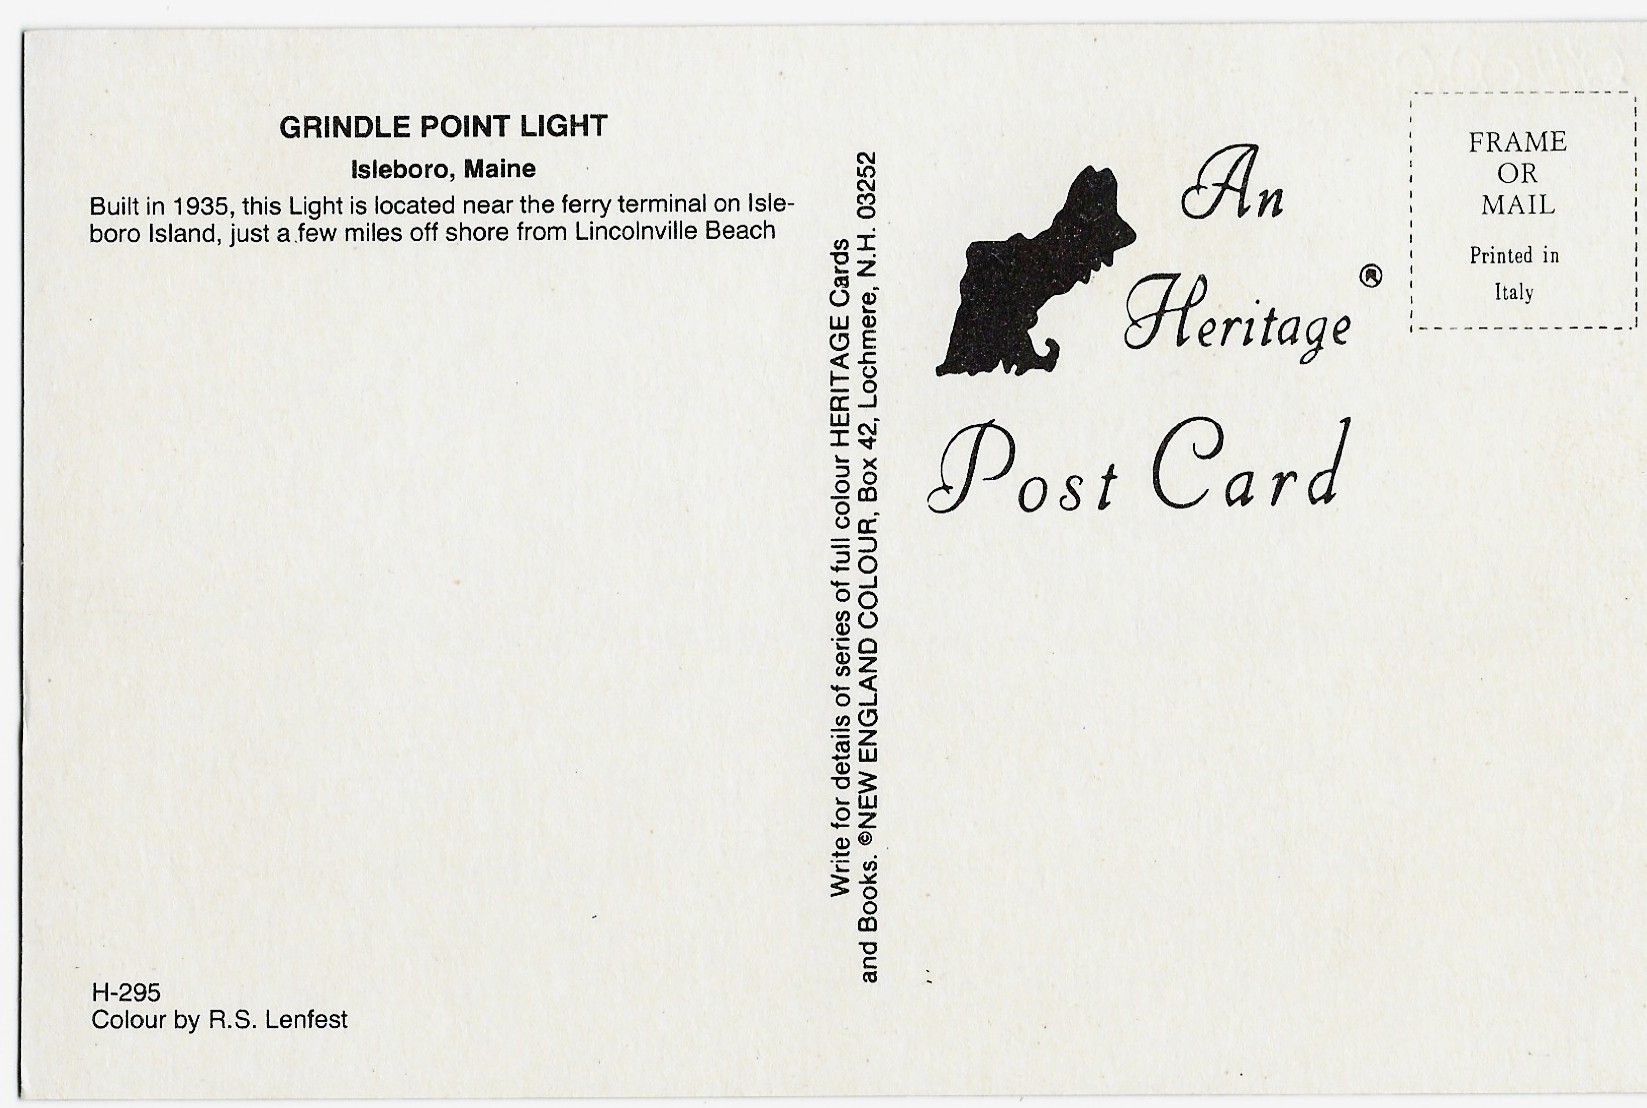 Grindle Point Light Isleboro, Maine (ME) Postcard H-295 - Click Image to Close